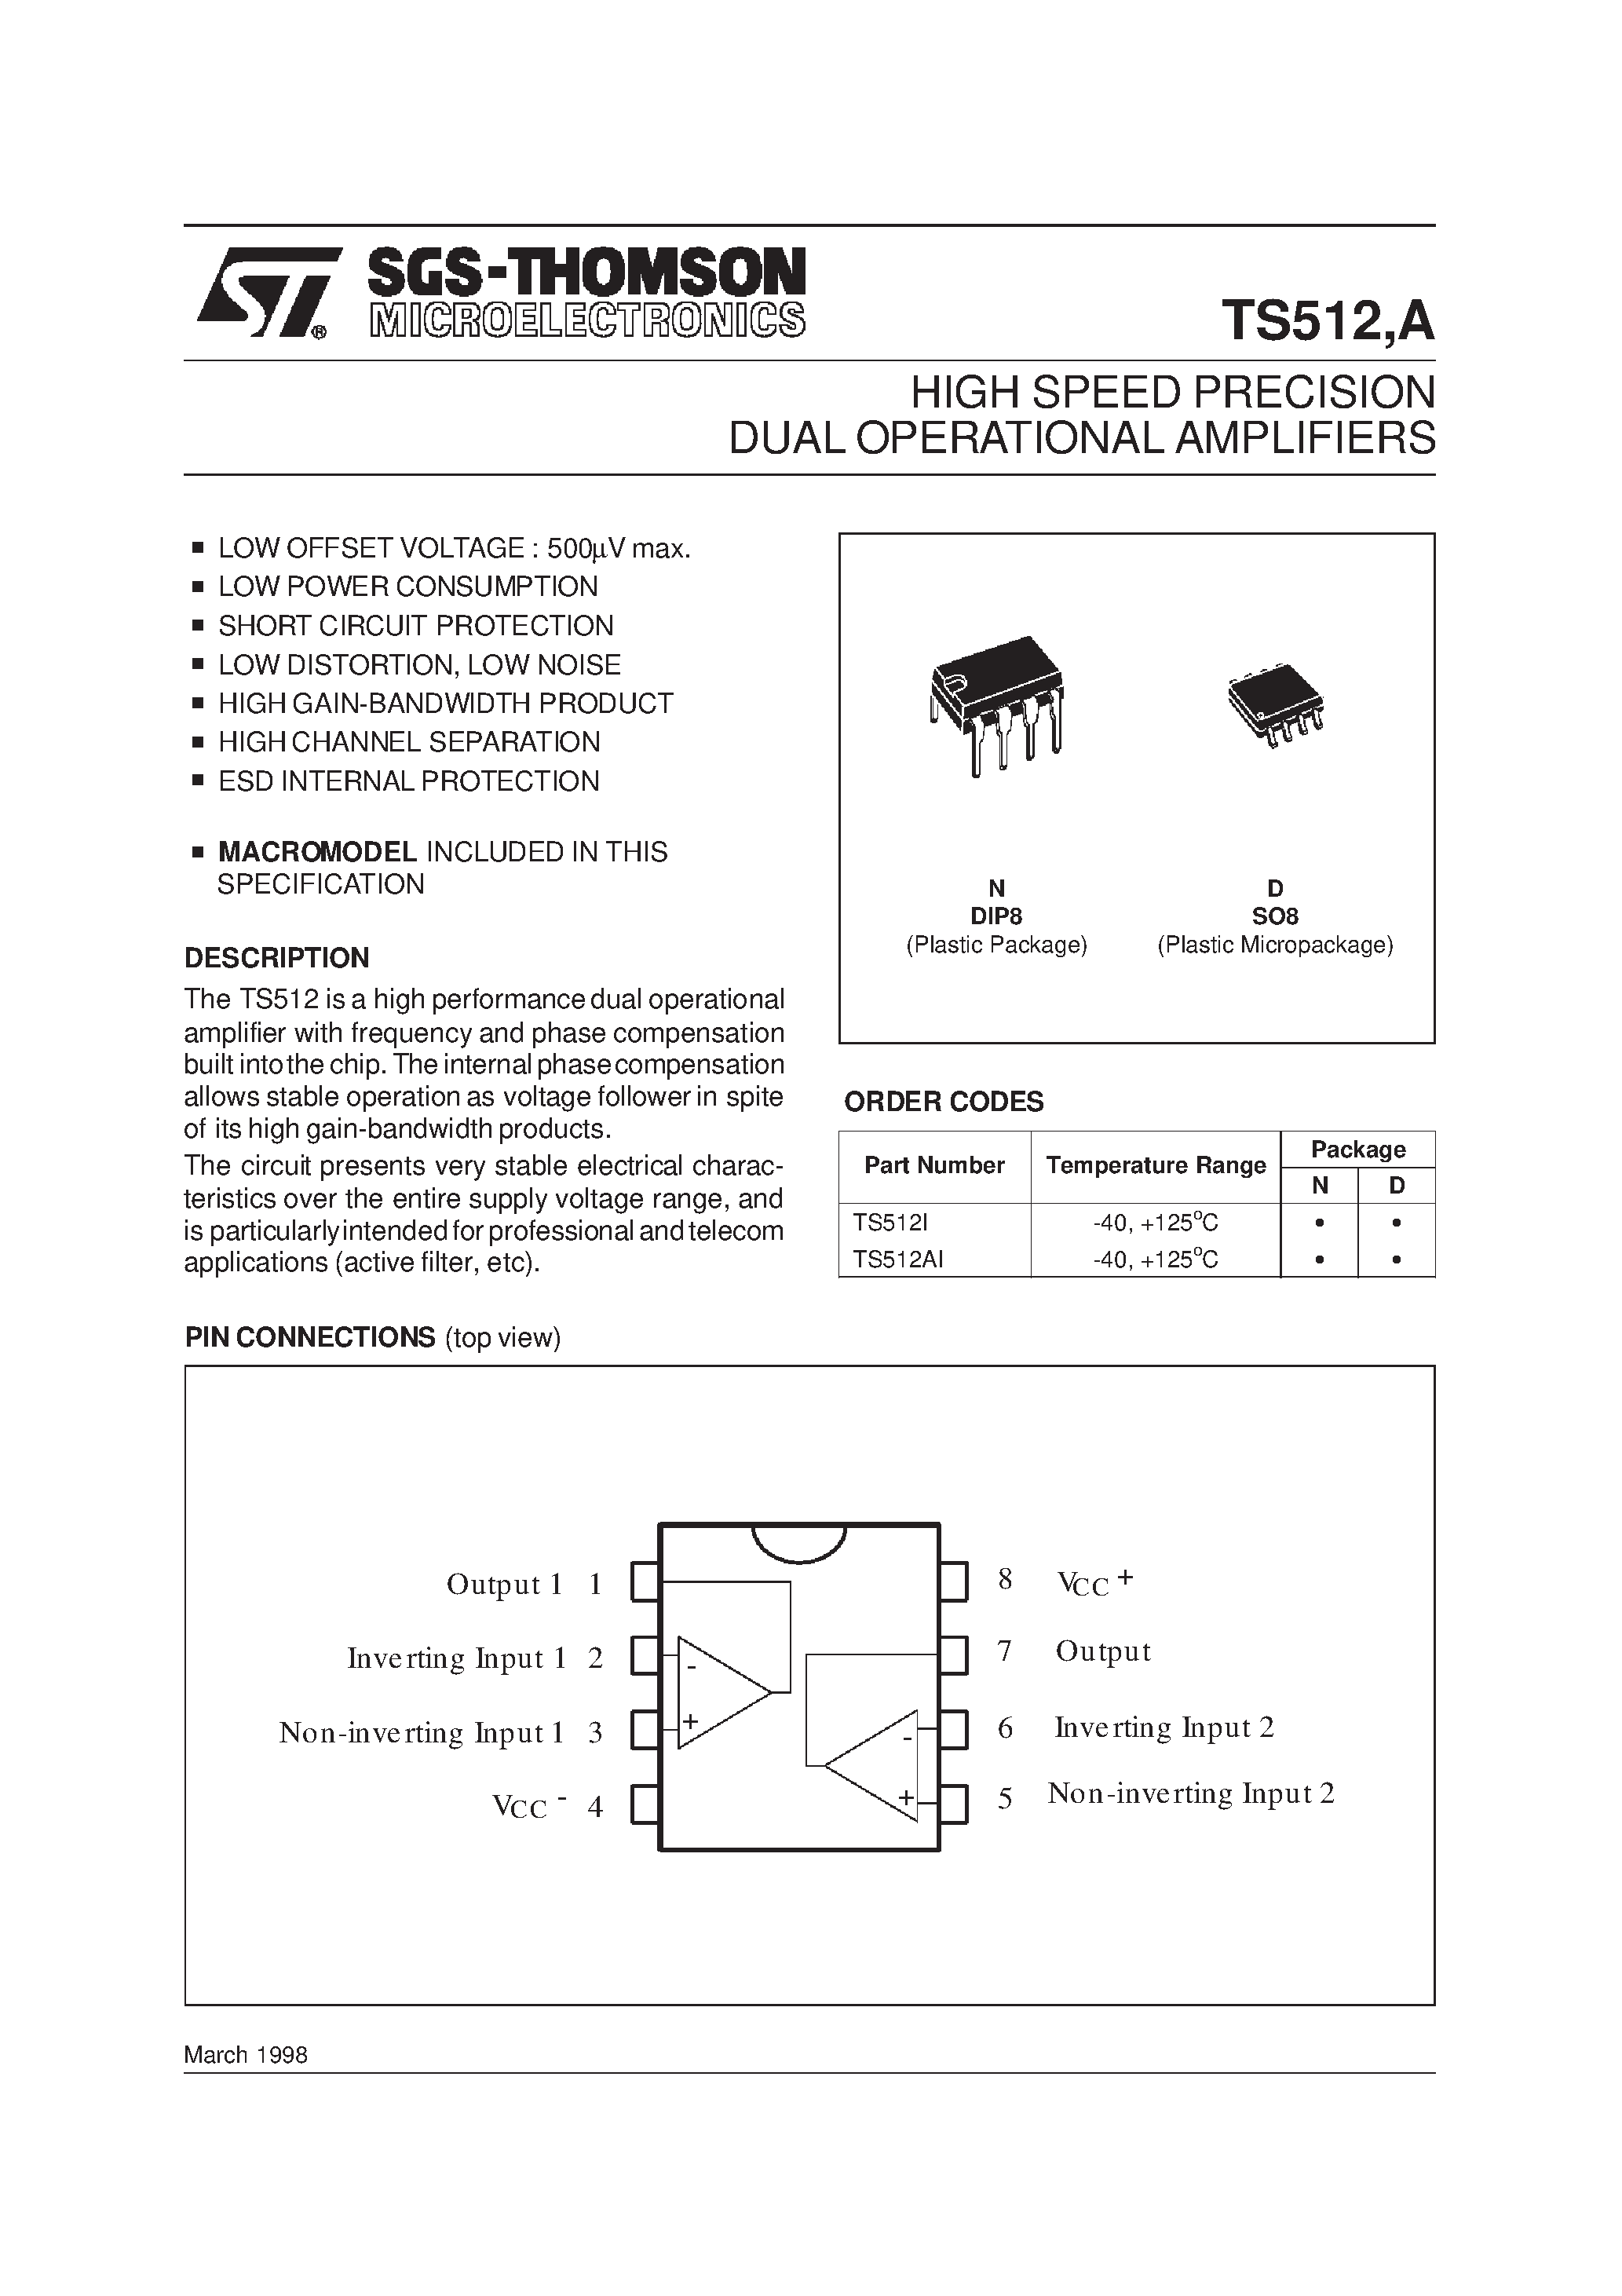 Datasheet TS512A - HIGH SPEED PRECISION DUAL OPERATIONAL AMPLIFIERS page 1